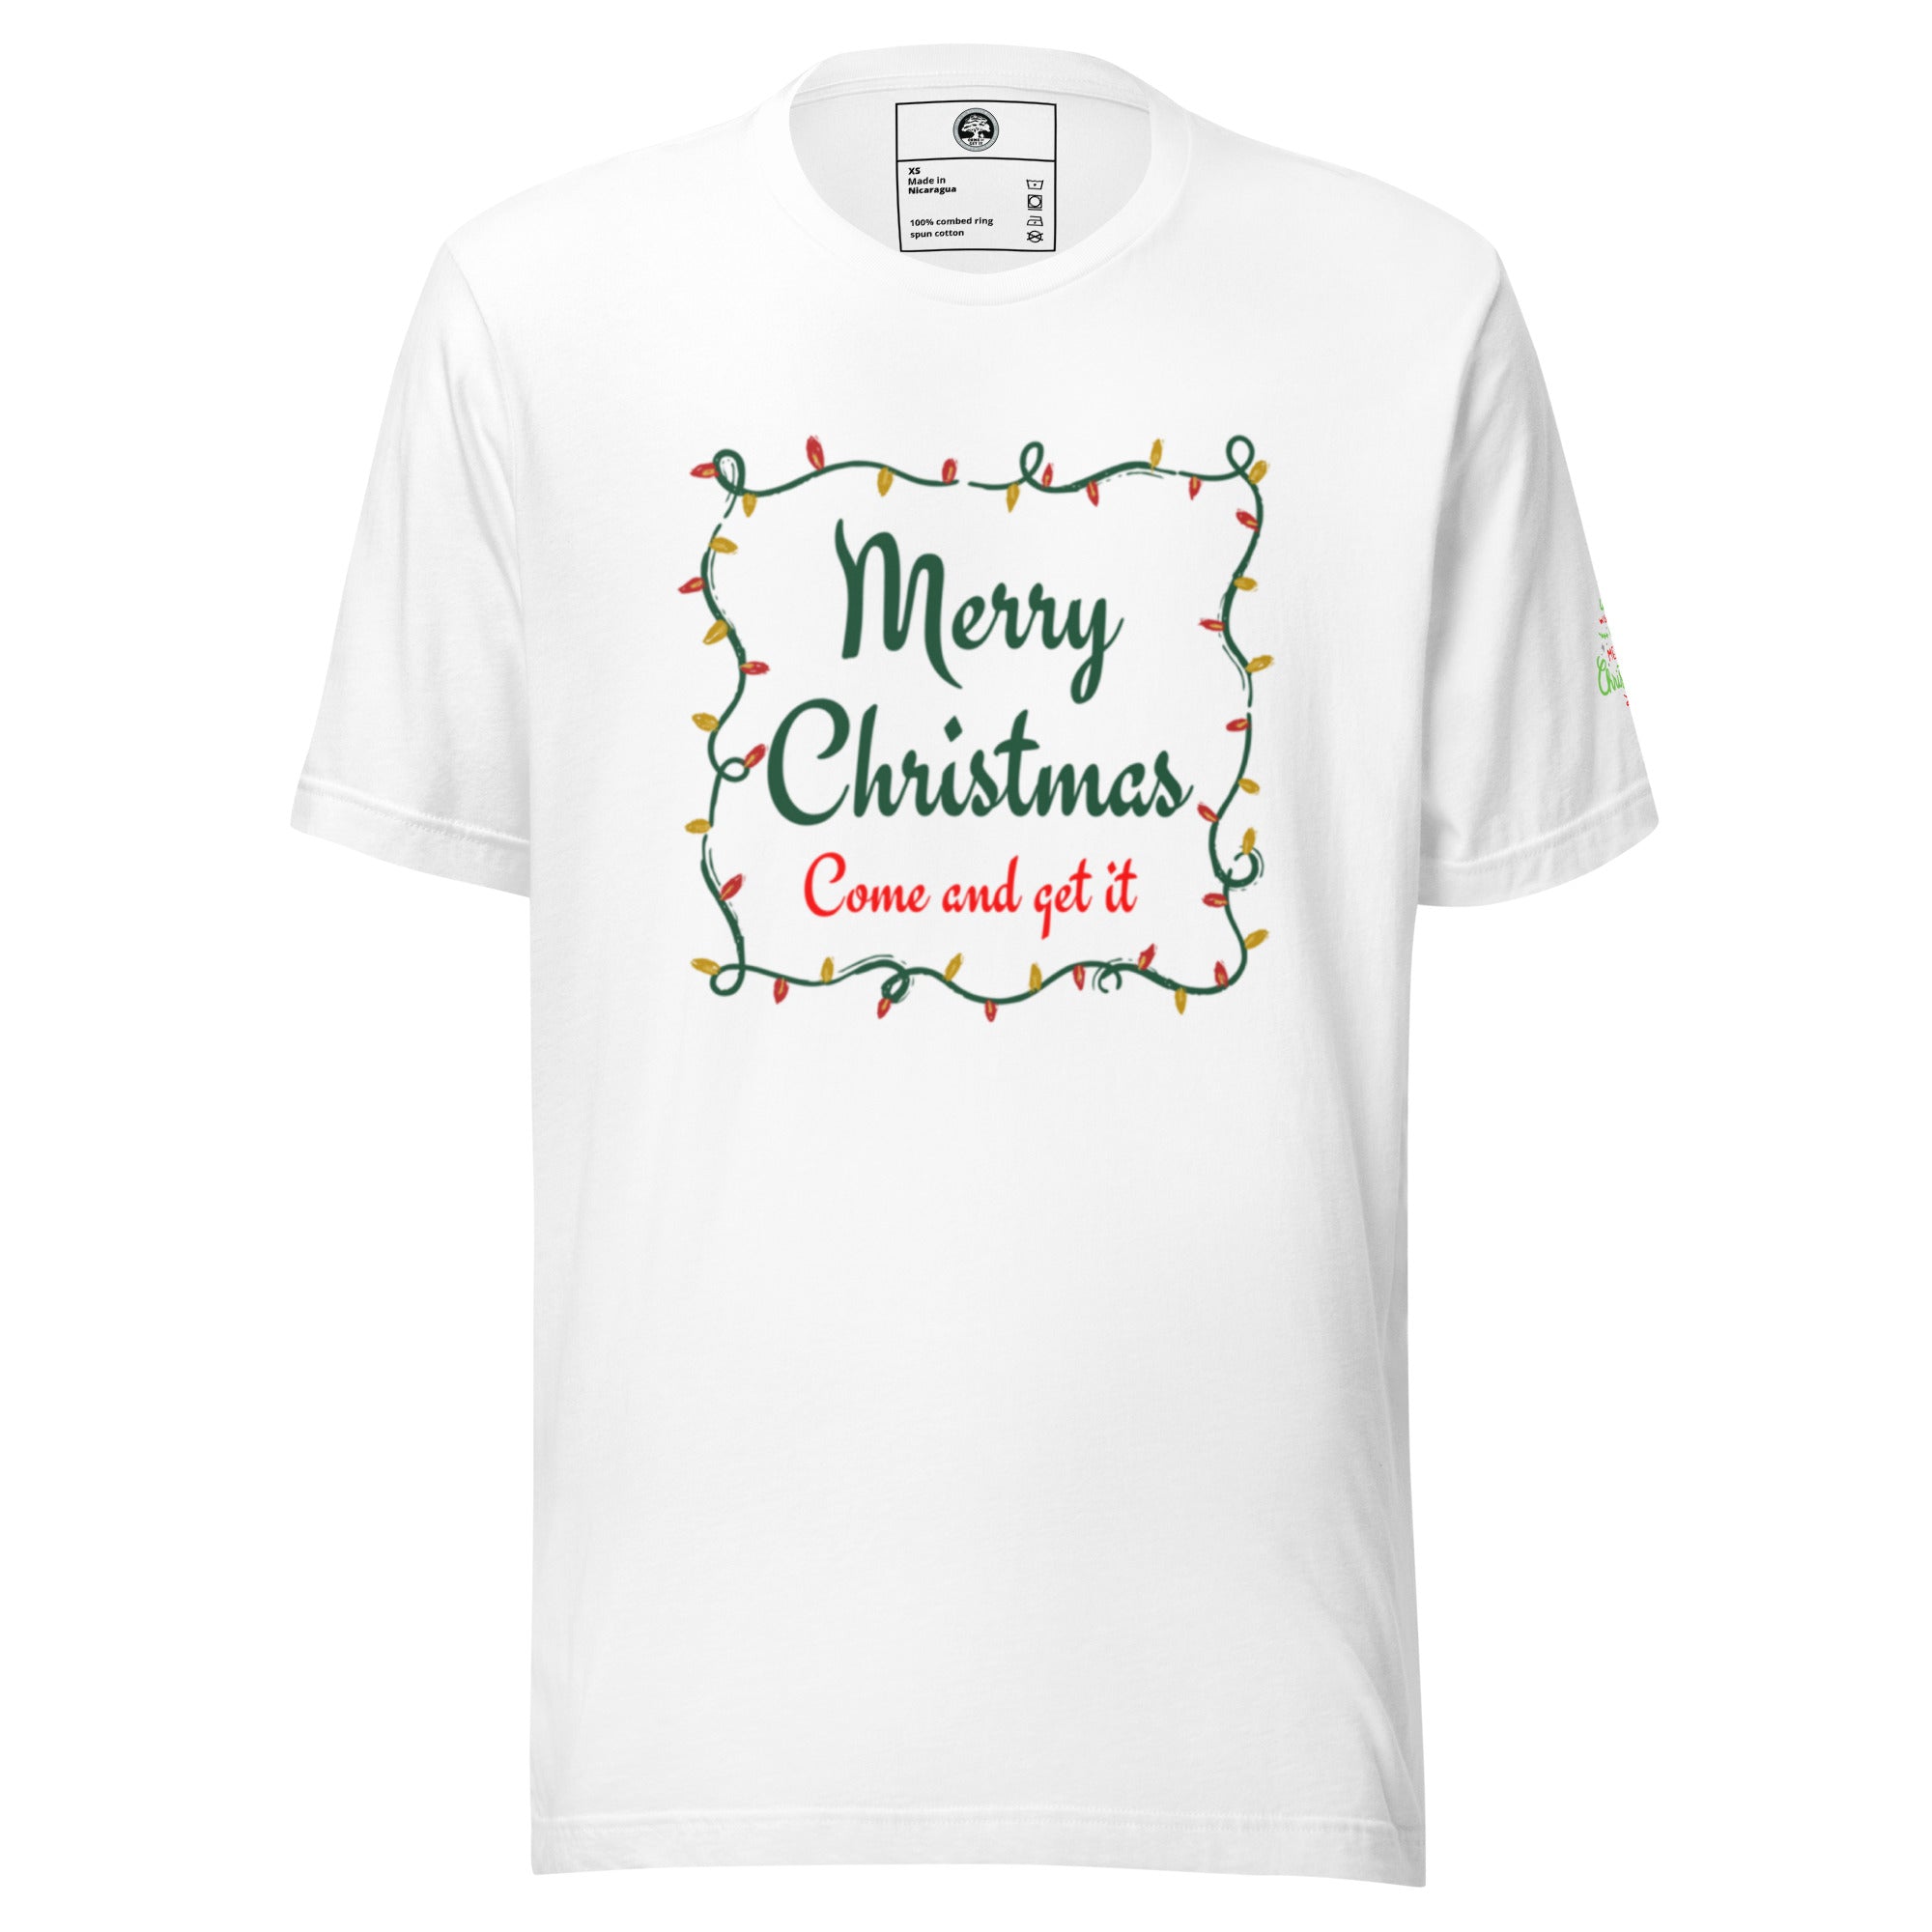 merry christmas, kentucky (white) Kids T-Shirt for Sale by myheadisaprison